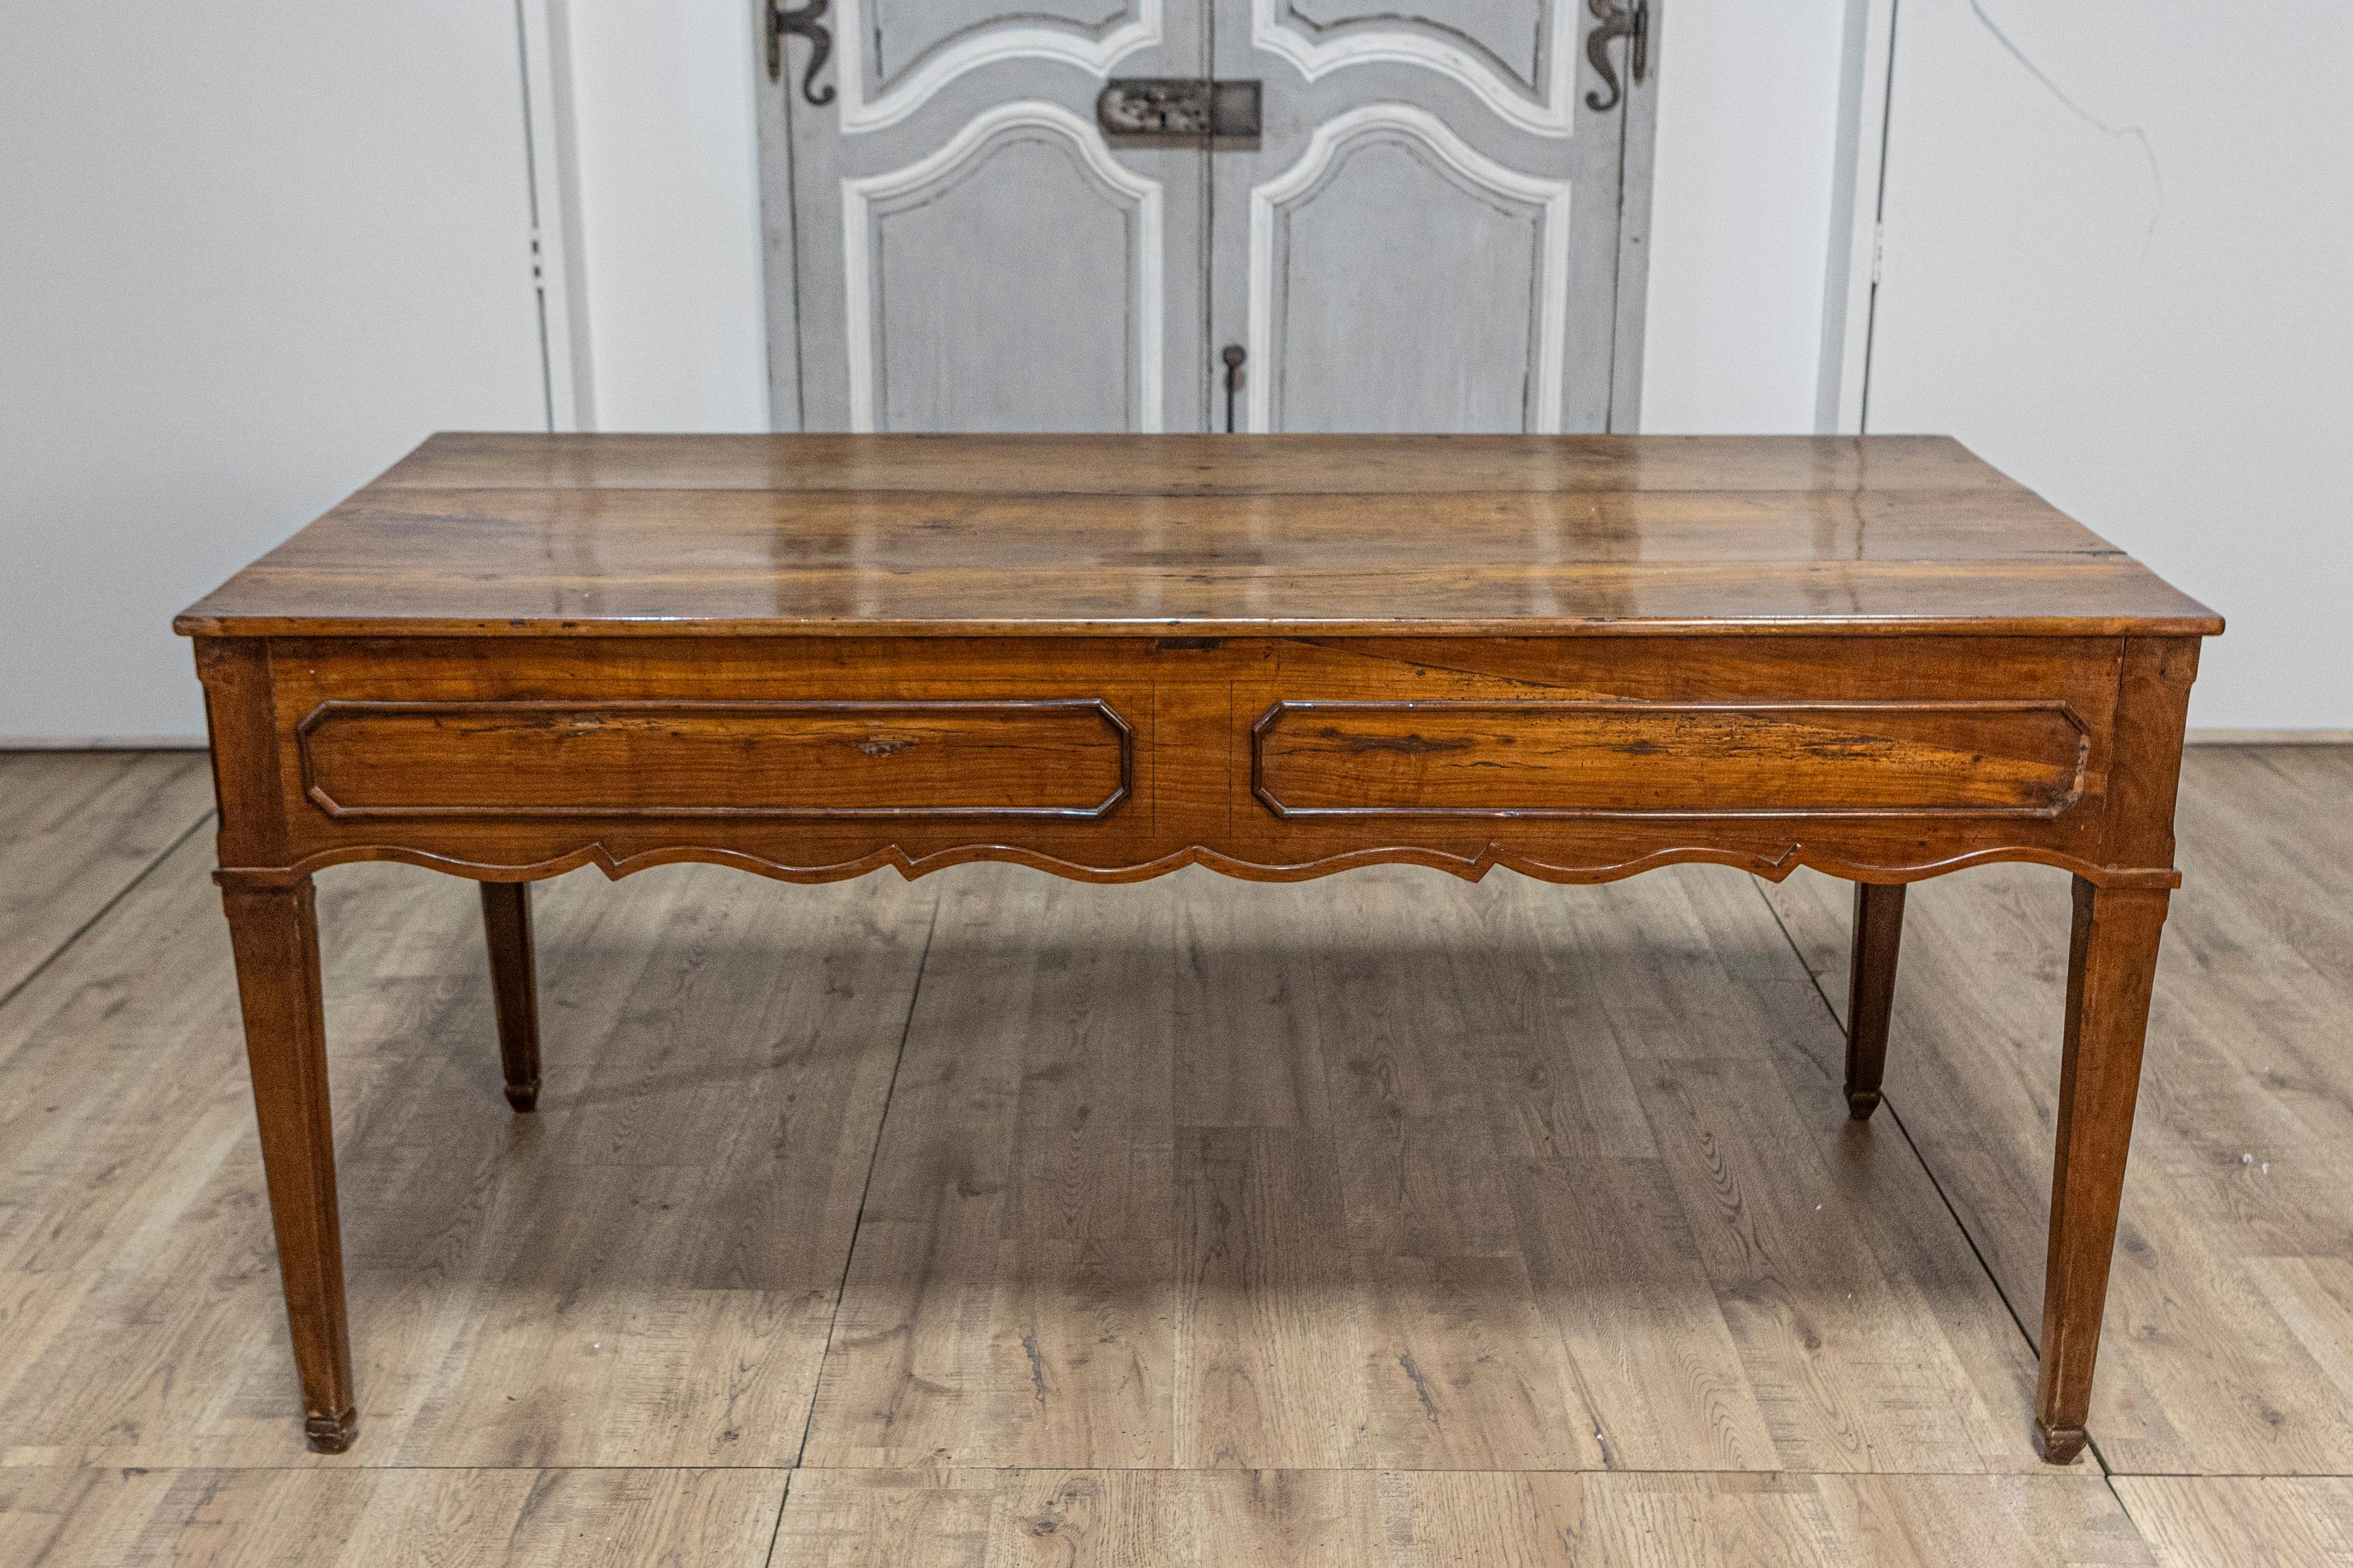 A French walnut desk from the 19th century with carved apron and lateral drawer. This elegant French walnut desk from the 19th century is a splendid example of classic craftsmanship, combining functional design with ornate aesthetic details. The